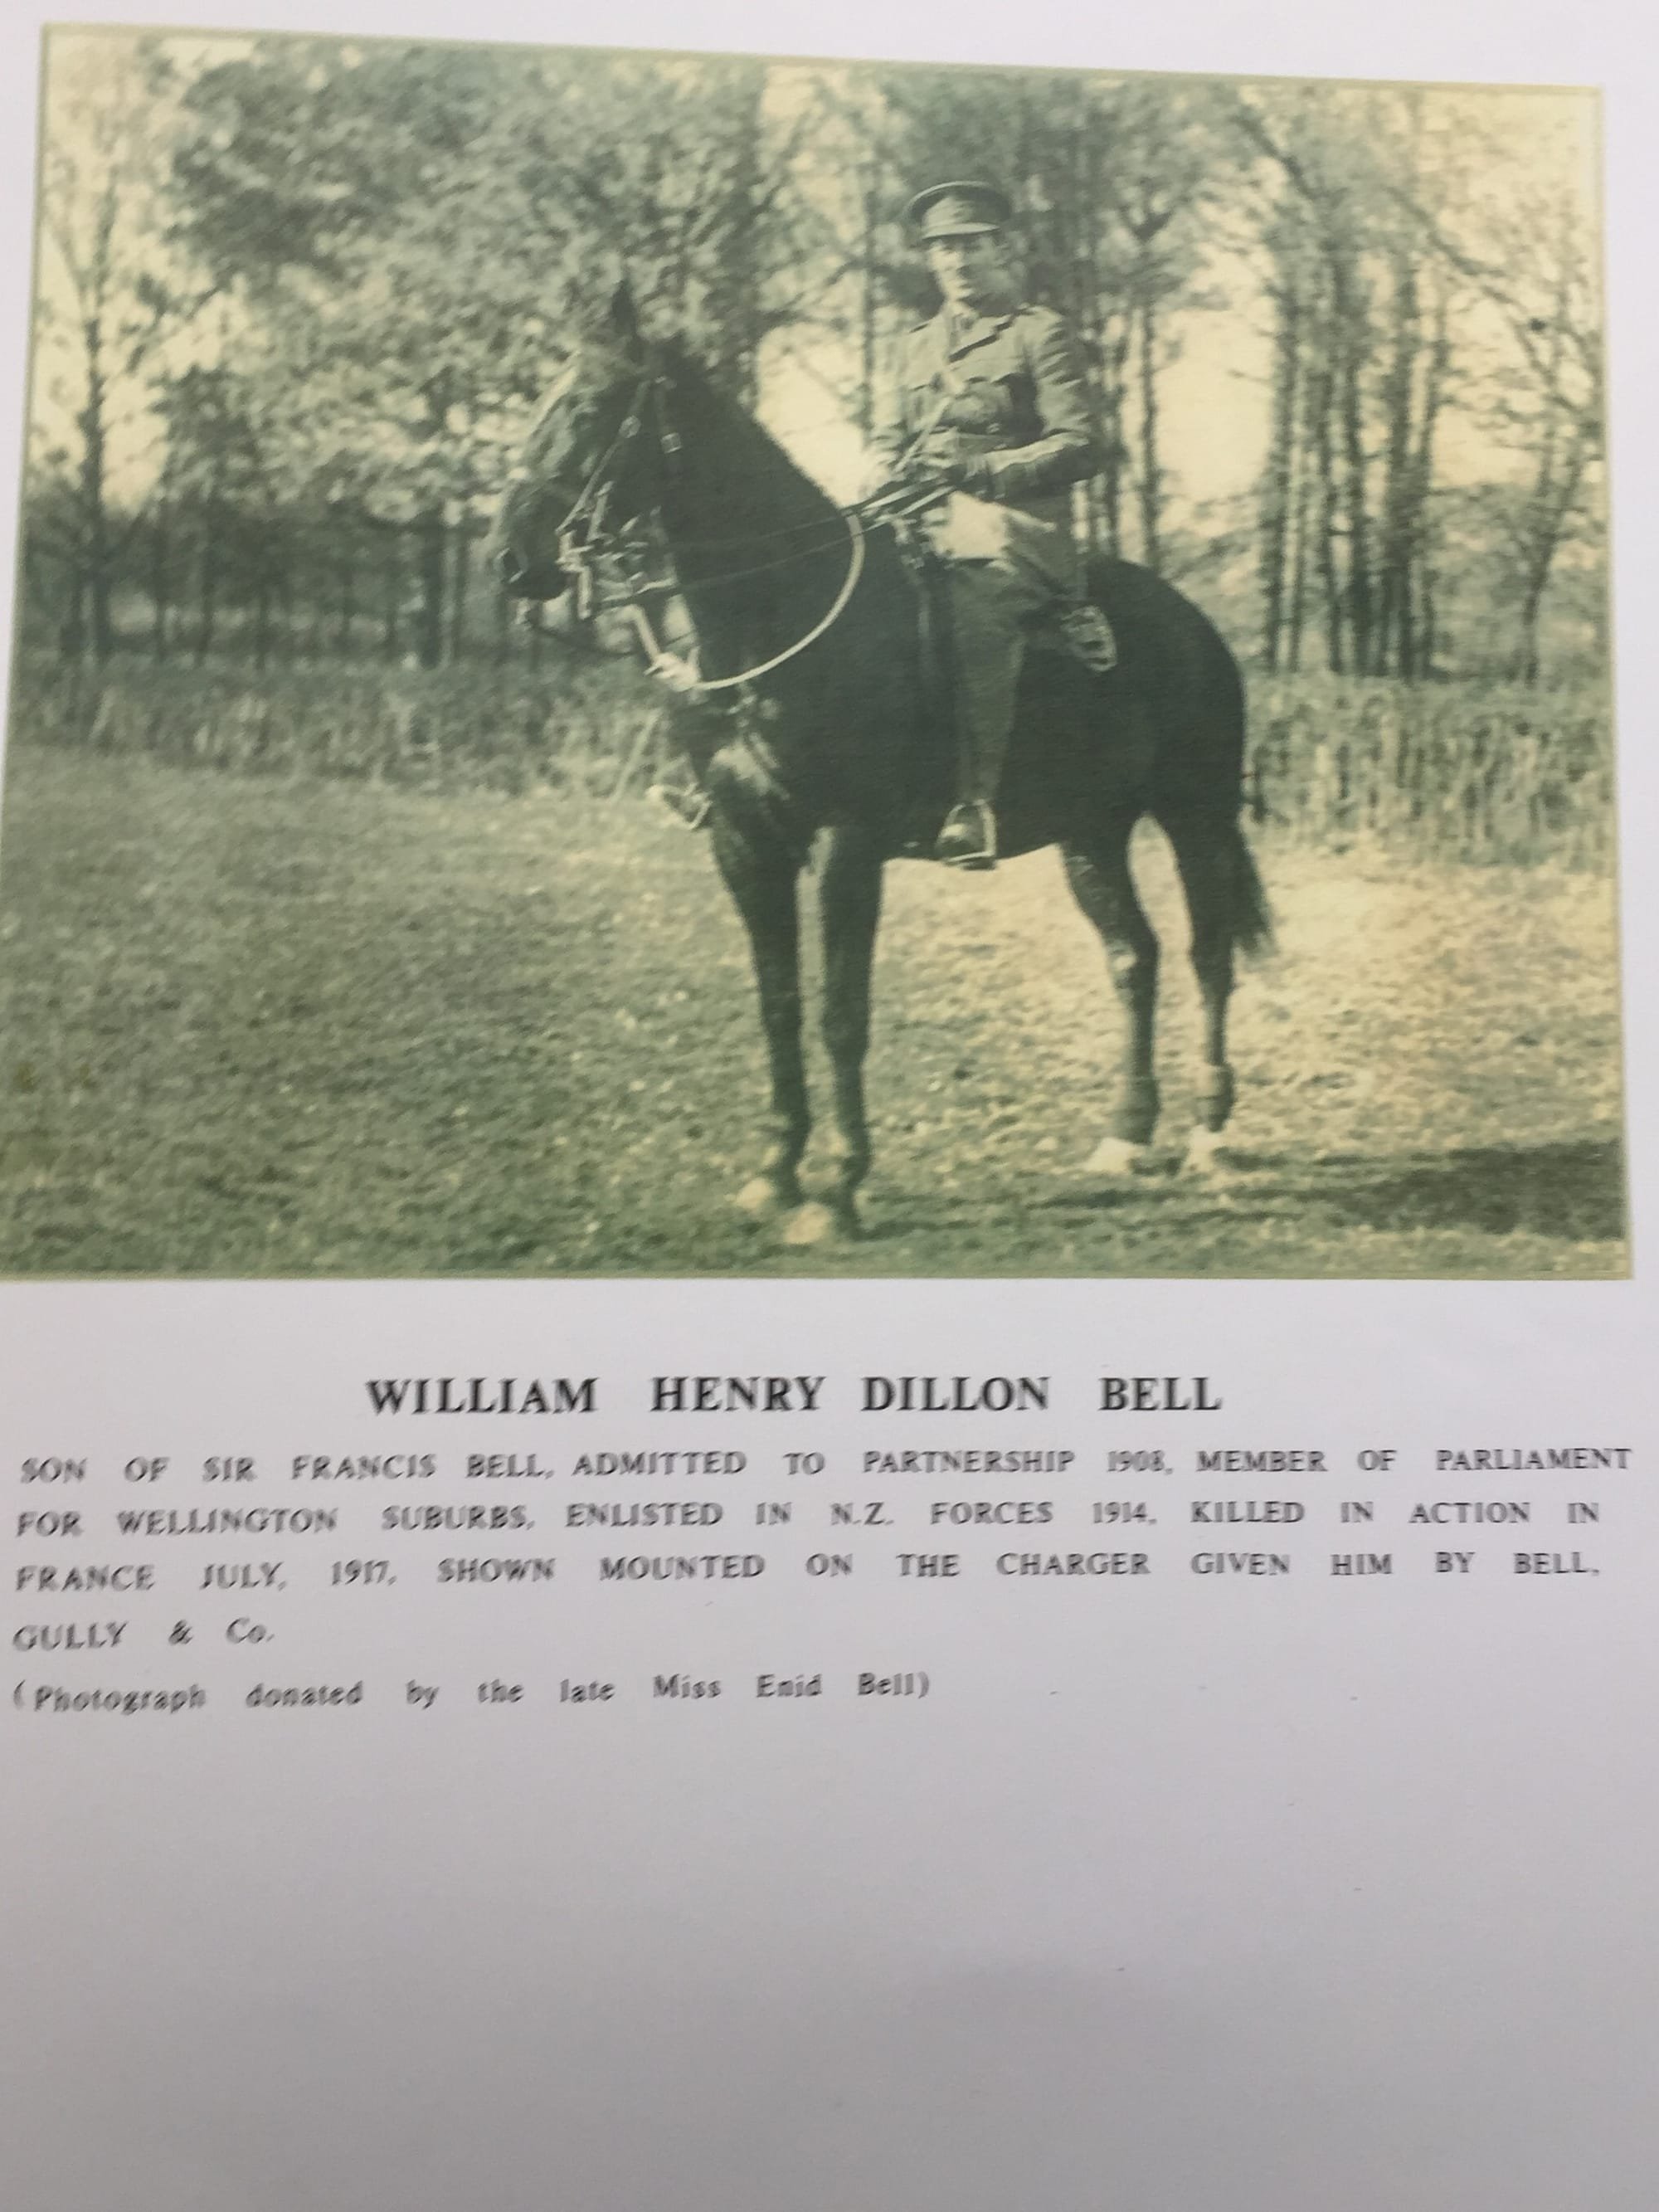 BELL, William (Hal) Henry Dillon. Serjeant commissioned as a Lieutenant pre-war KEH.